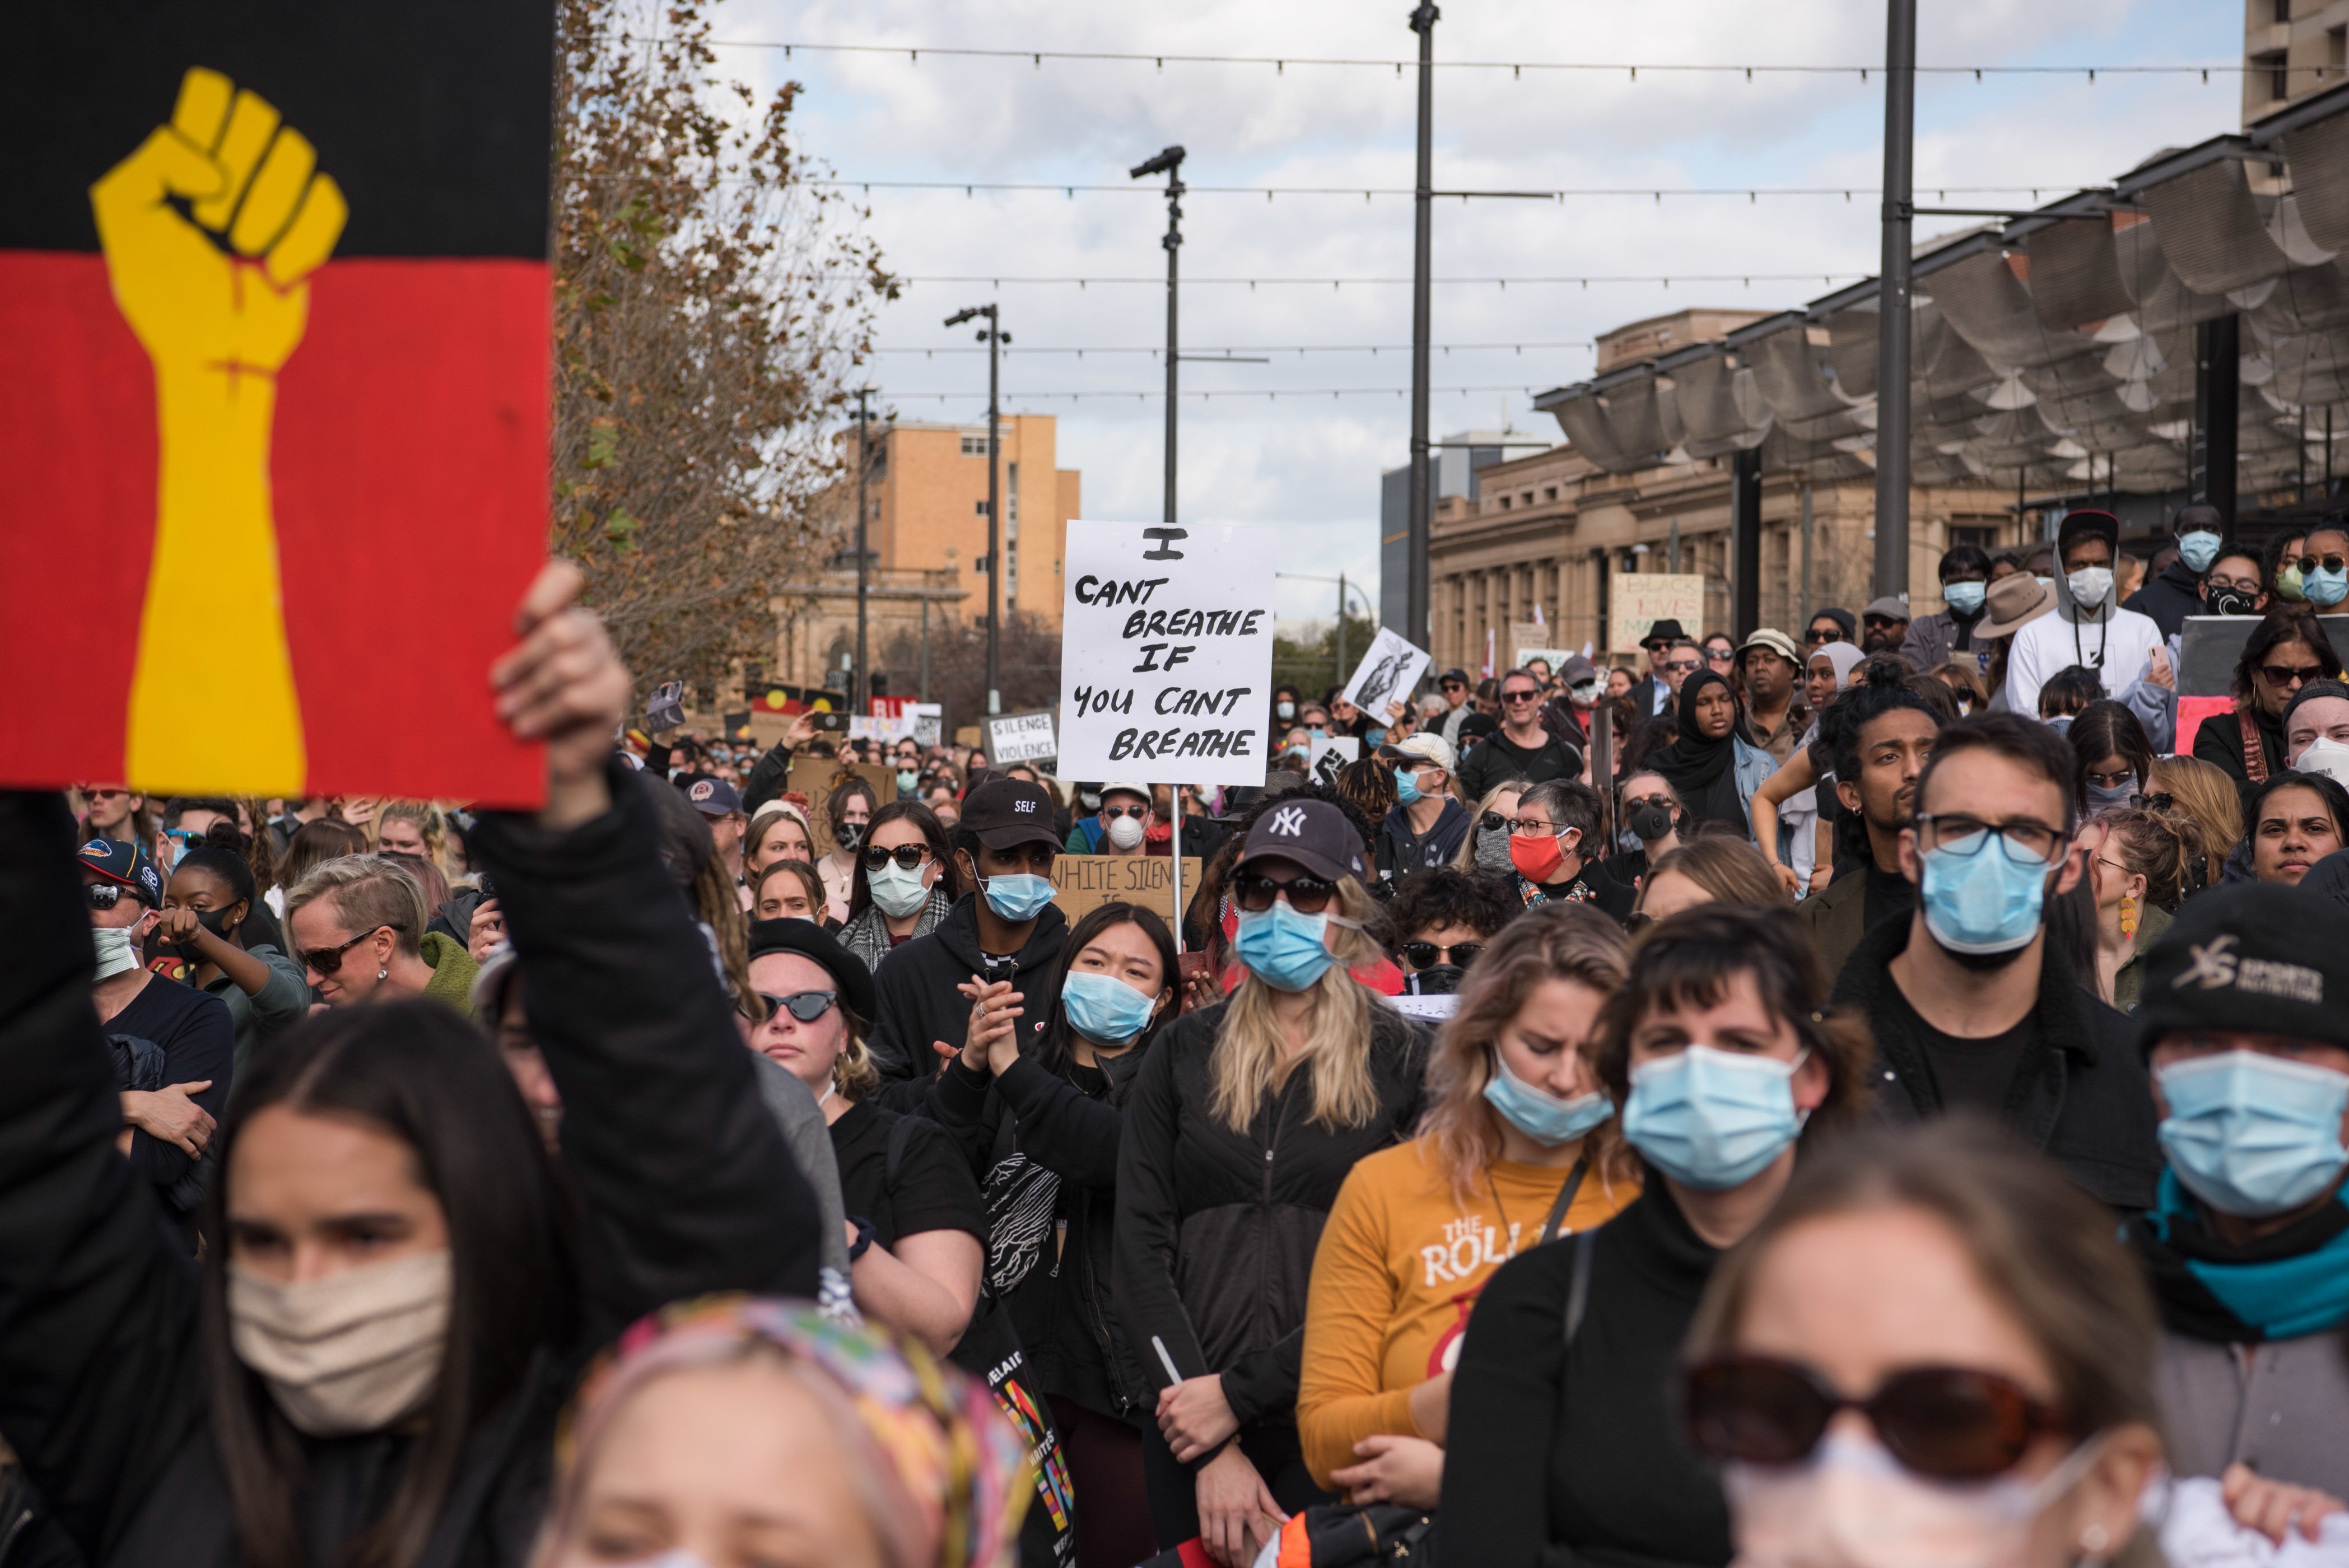 Thousands of protesters gathered at Adelaide's Victoria Square demonstrating in support of the Black Lives Matter movement.